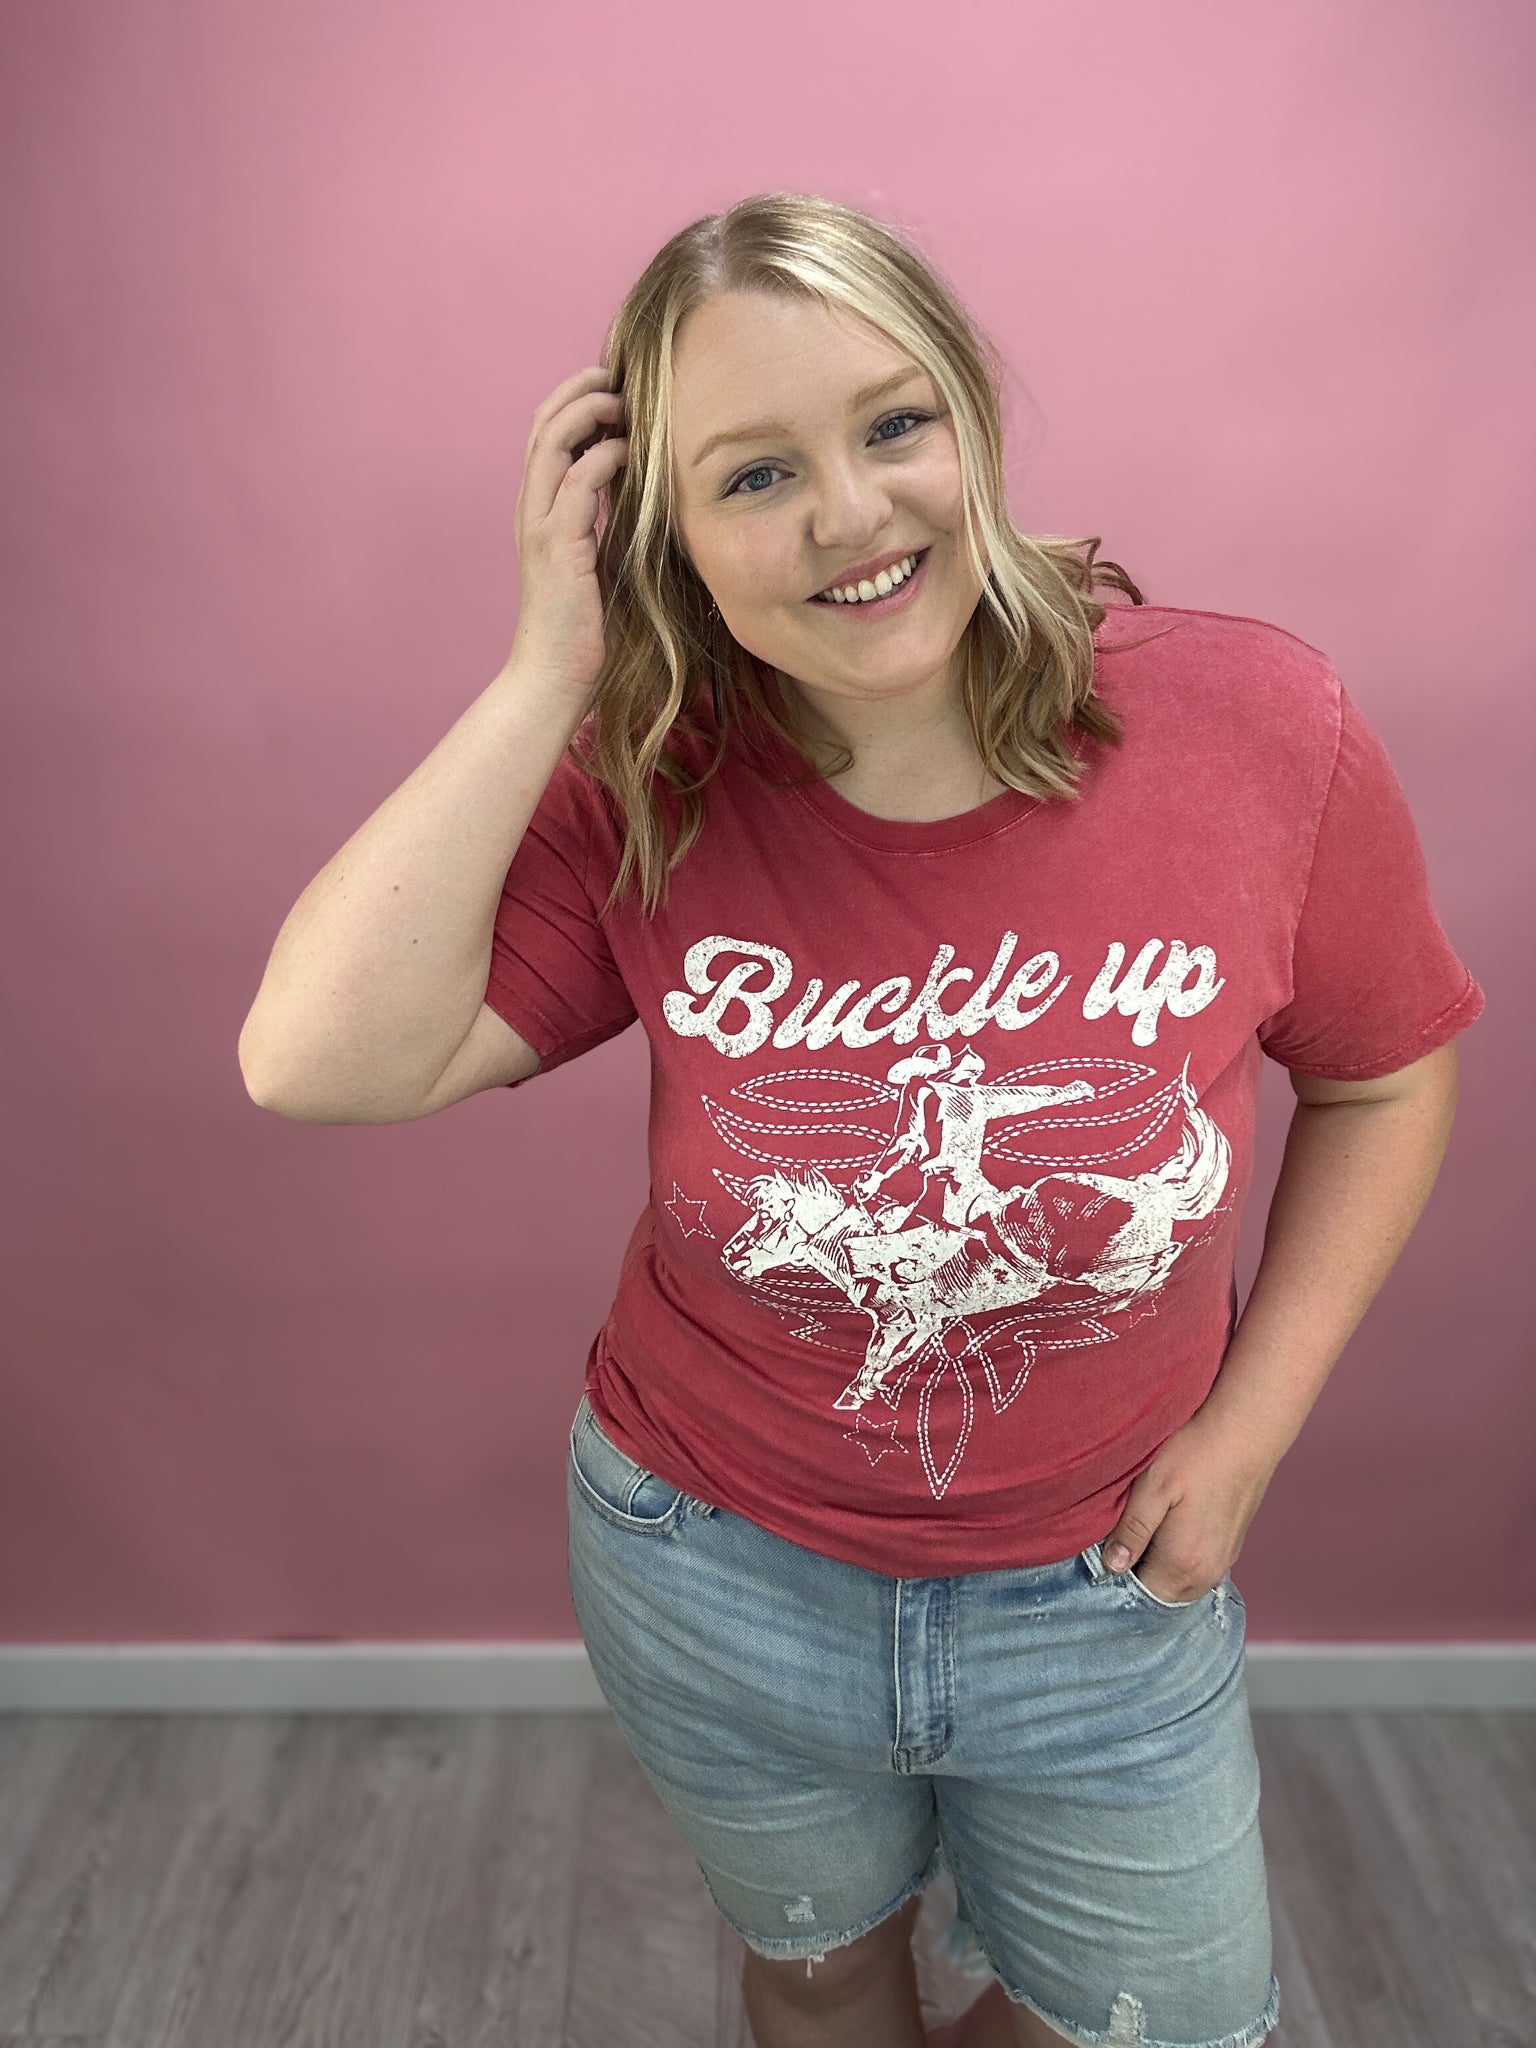 Buckle Up Stitch Pattern Graphic Tee